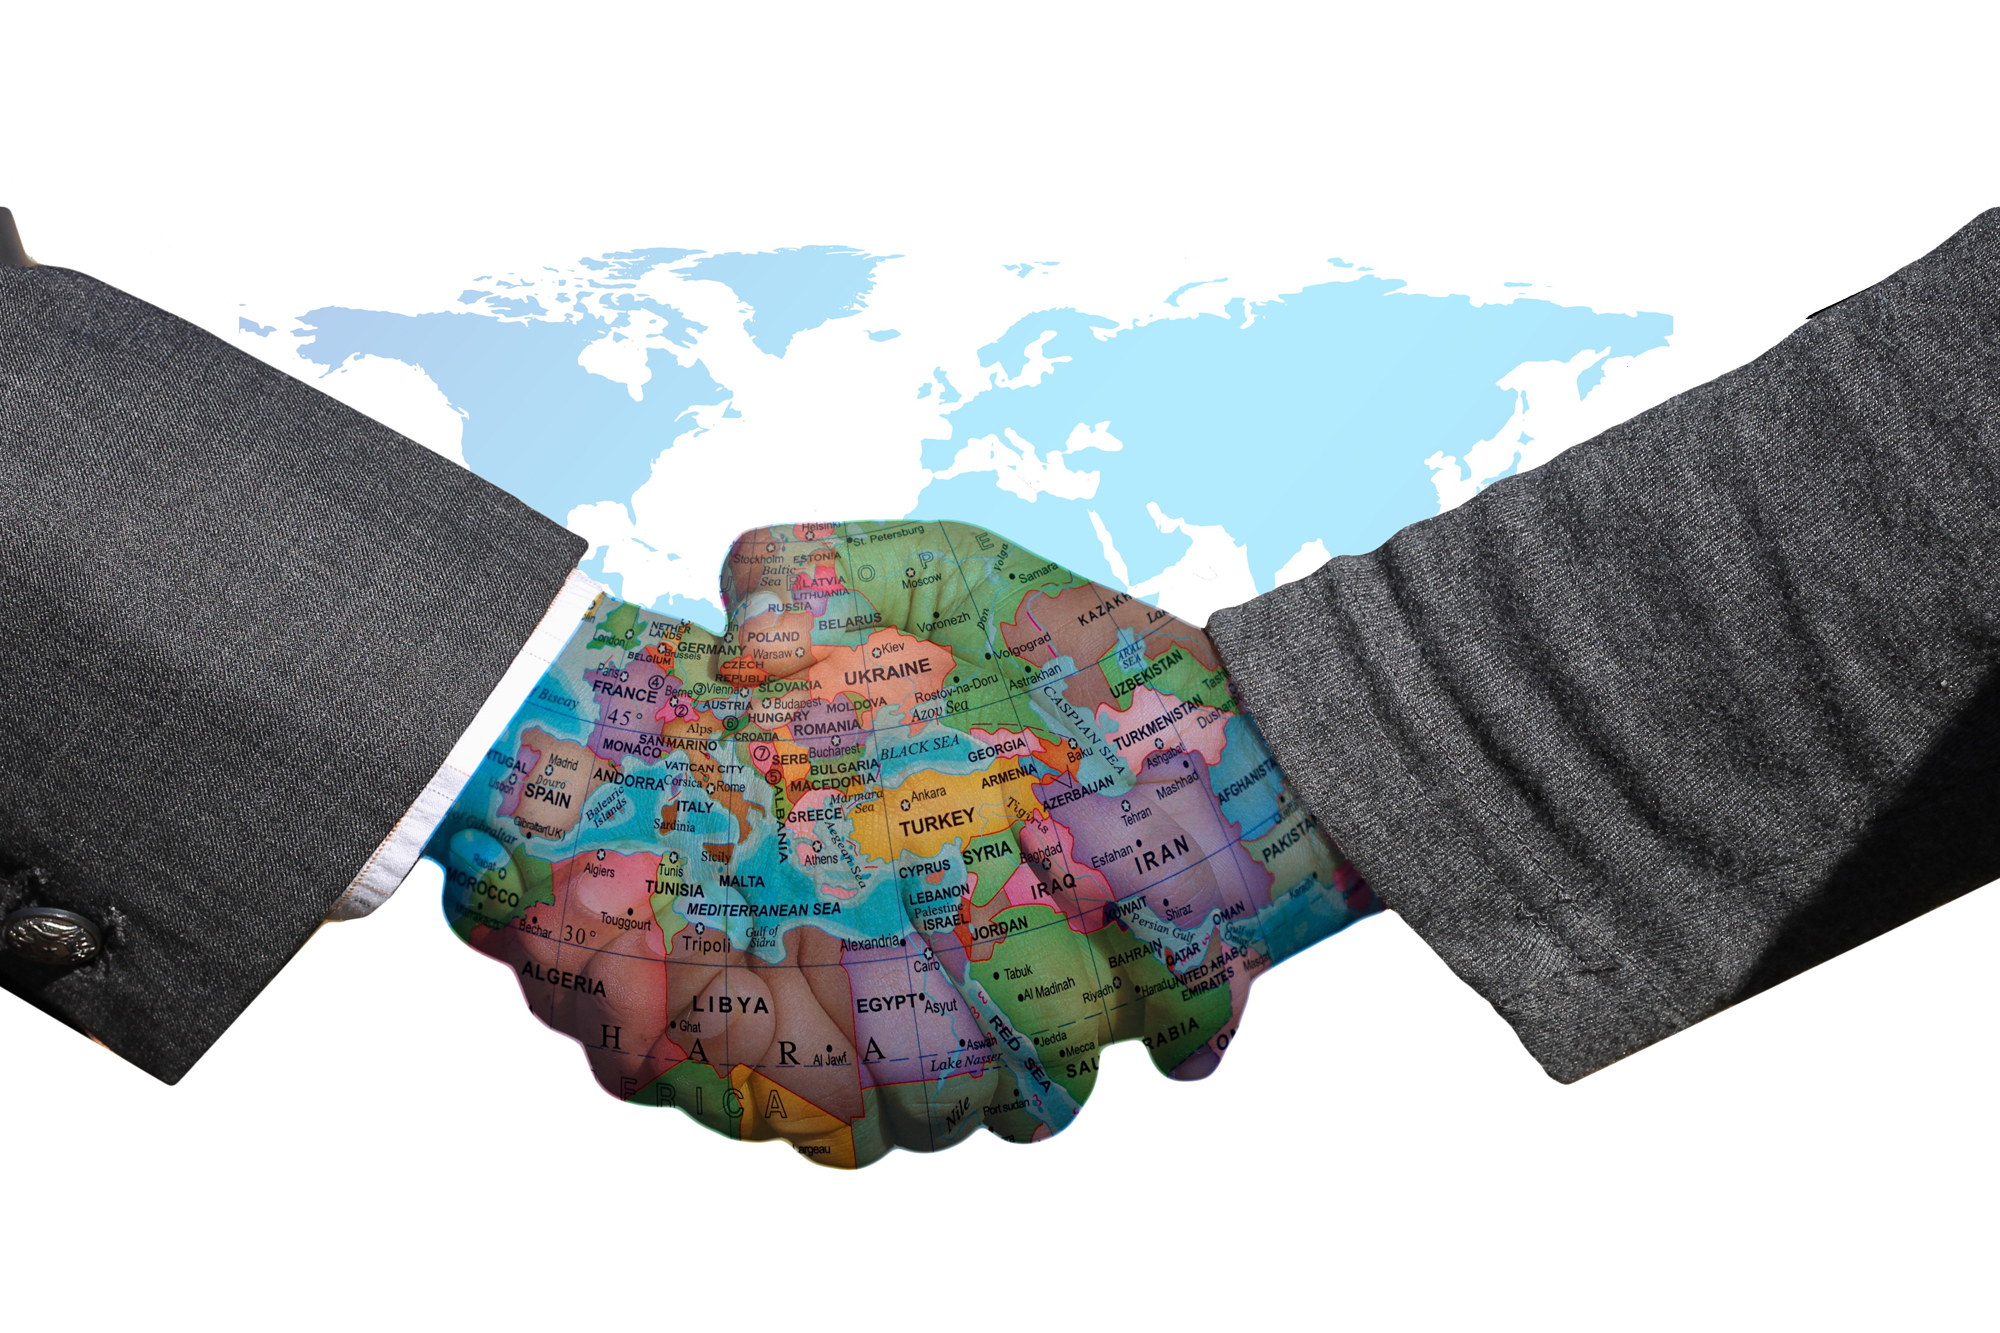 Image of two hands shaking in front of a world map